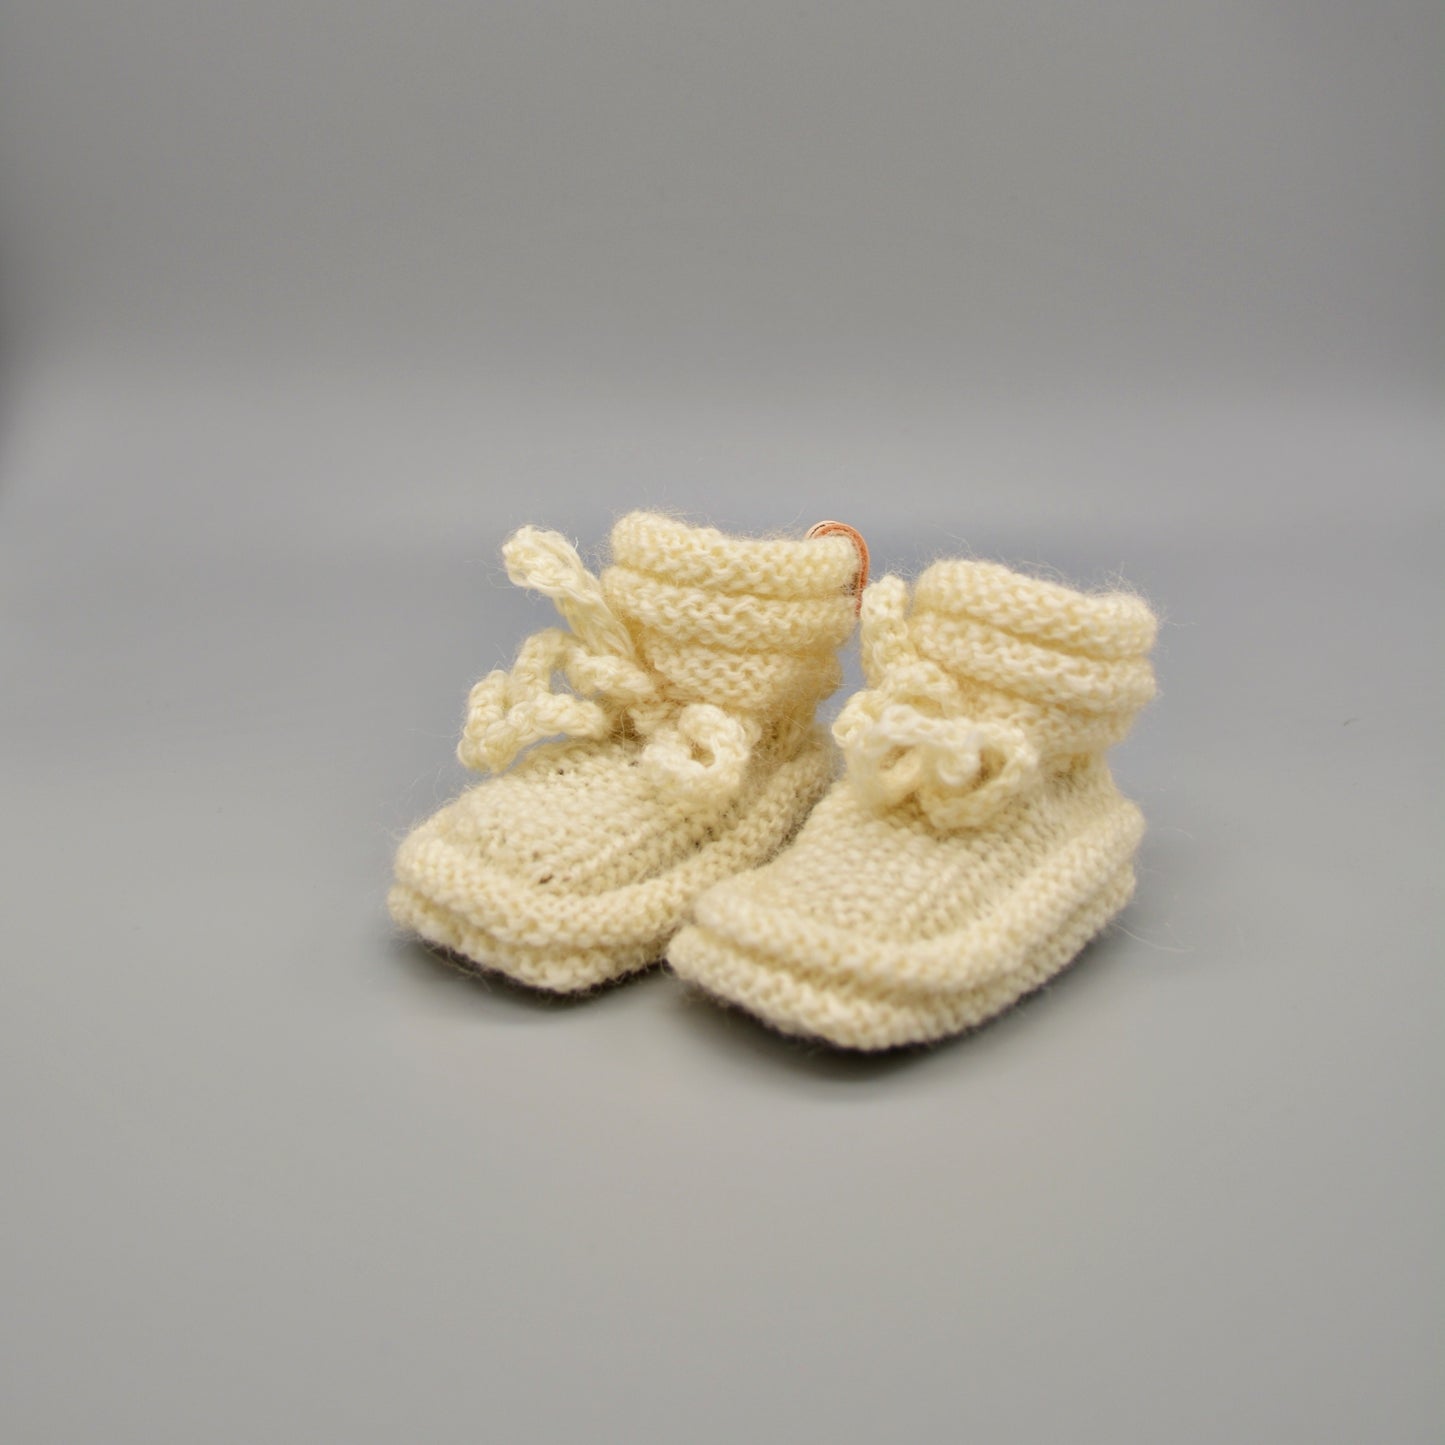 Baby slippers - Cream - Knitted